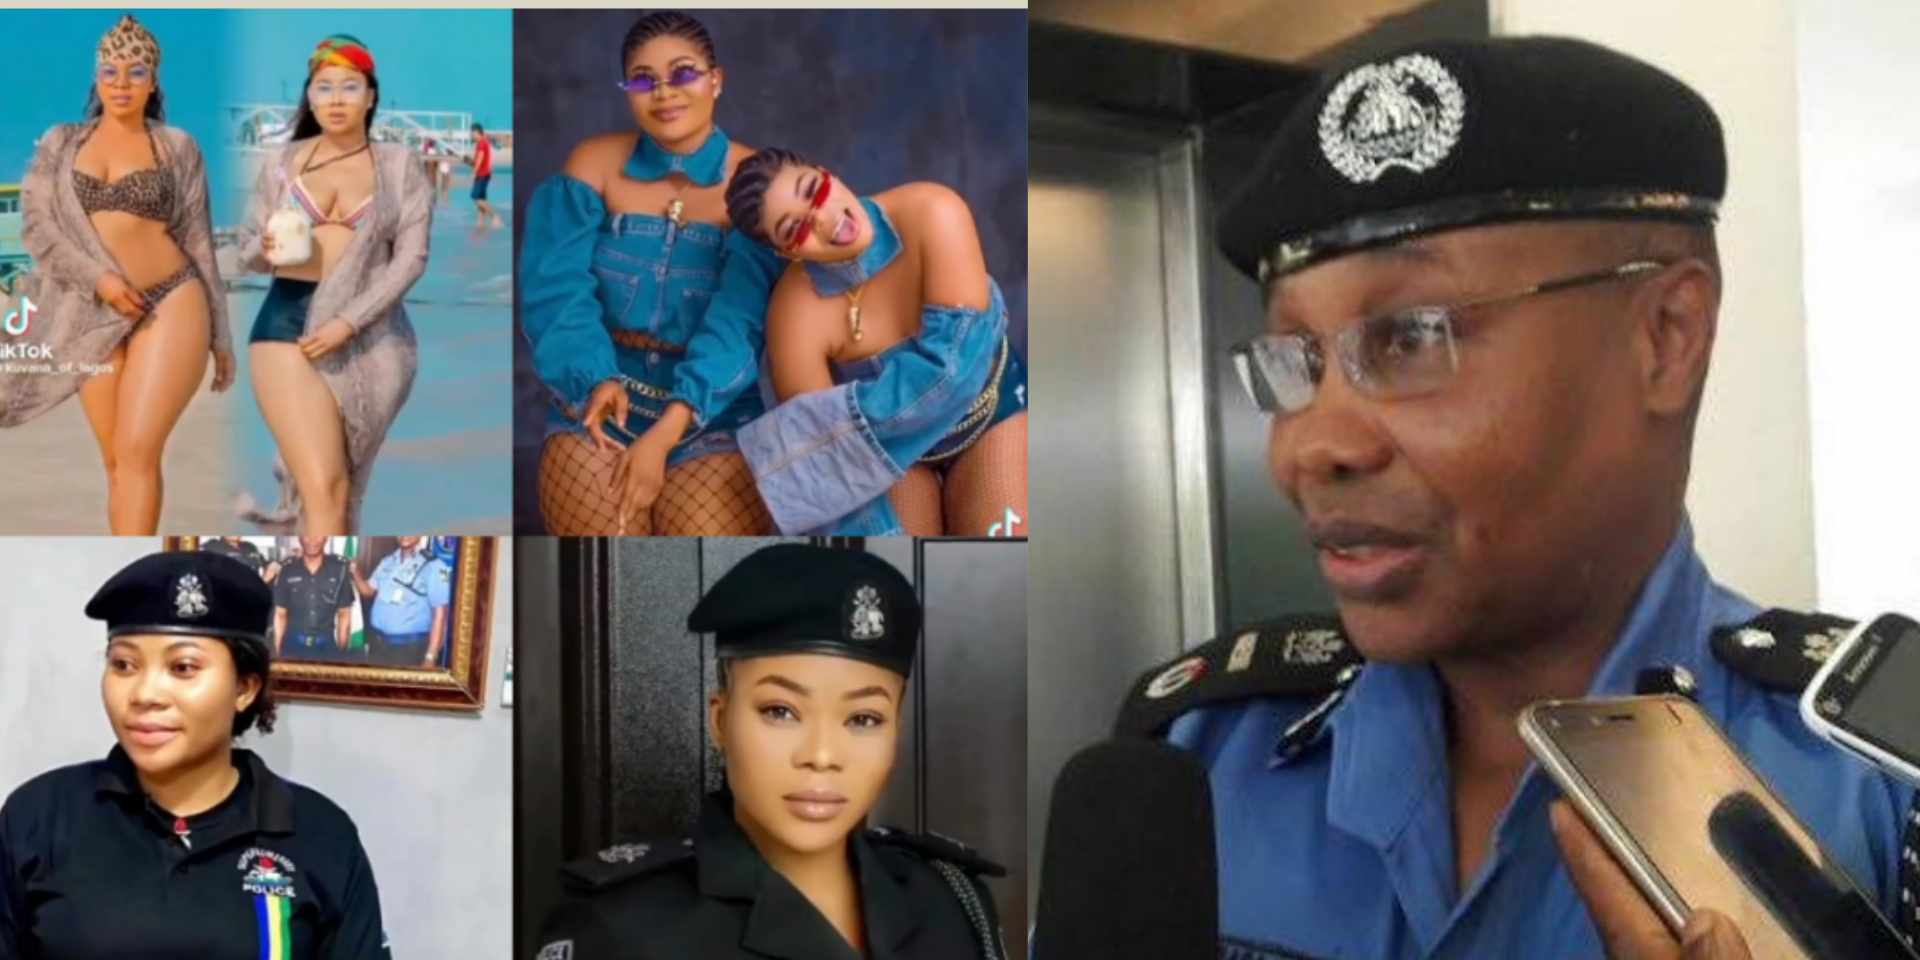 Police suspend female officers in viral TikTok video for violation of social media policy [Video]